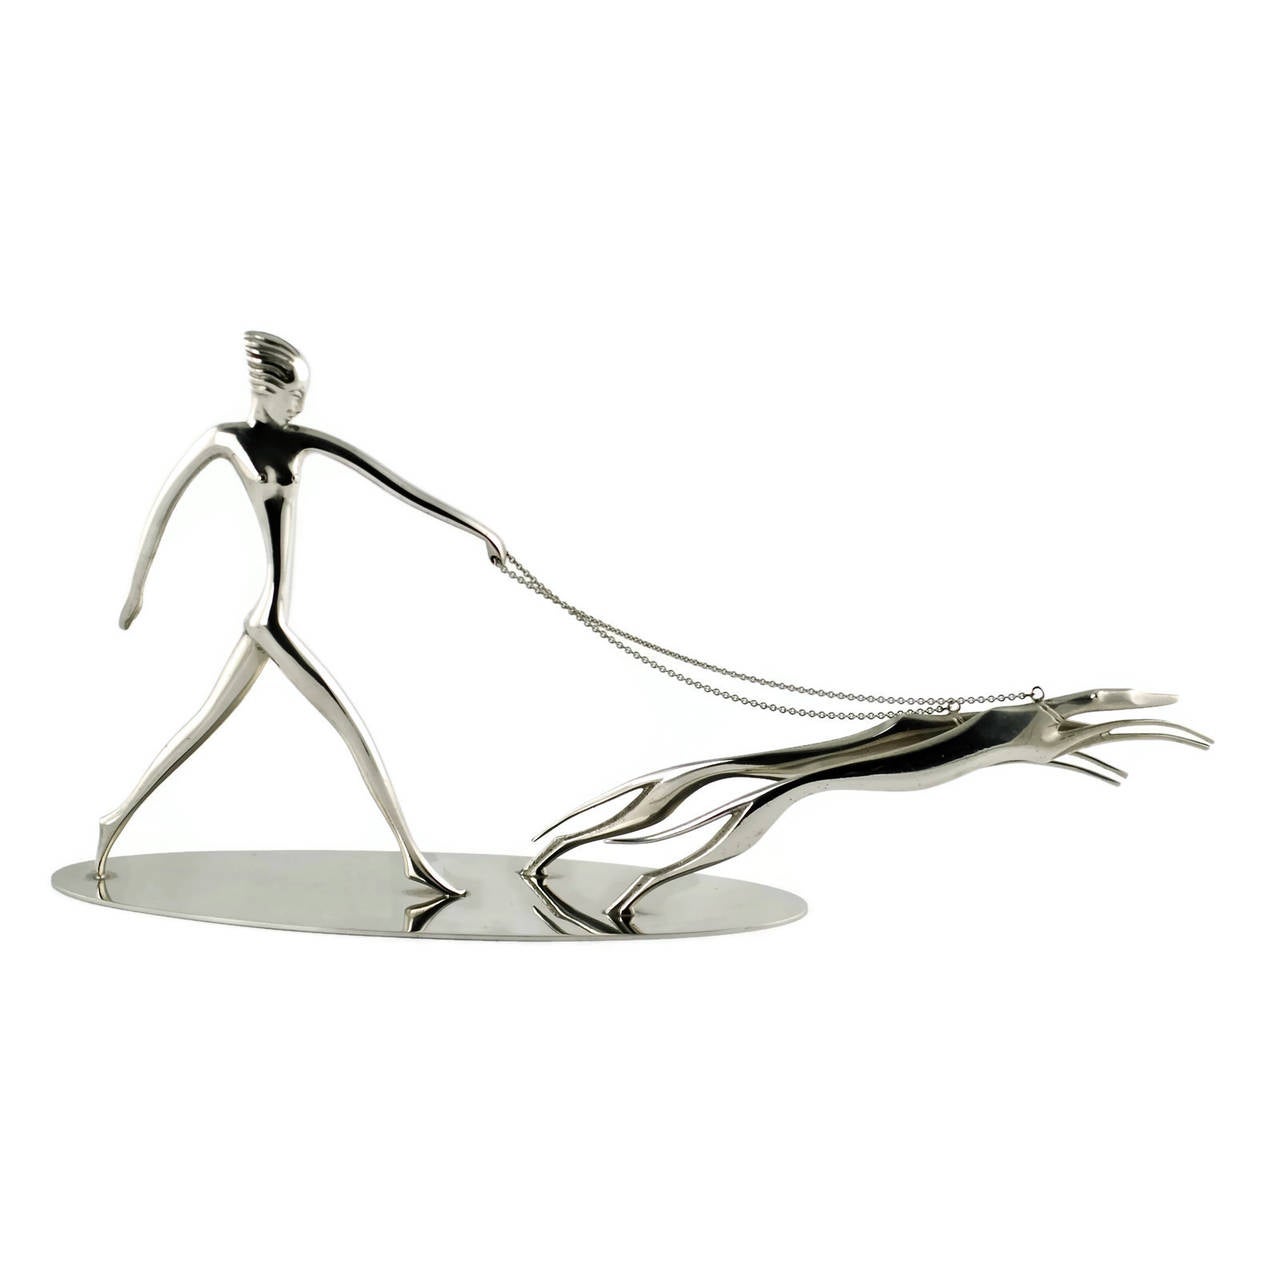 This dynamic sculpture was designed by Austrian sculptor Karl Hagenauer, known for his iconic Art Deco decorative objects and furniture designs. This piece is composed of nickel-plated brass and features the highly stylized image of a lithe woman,